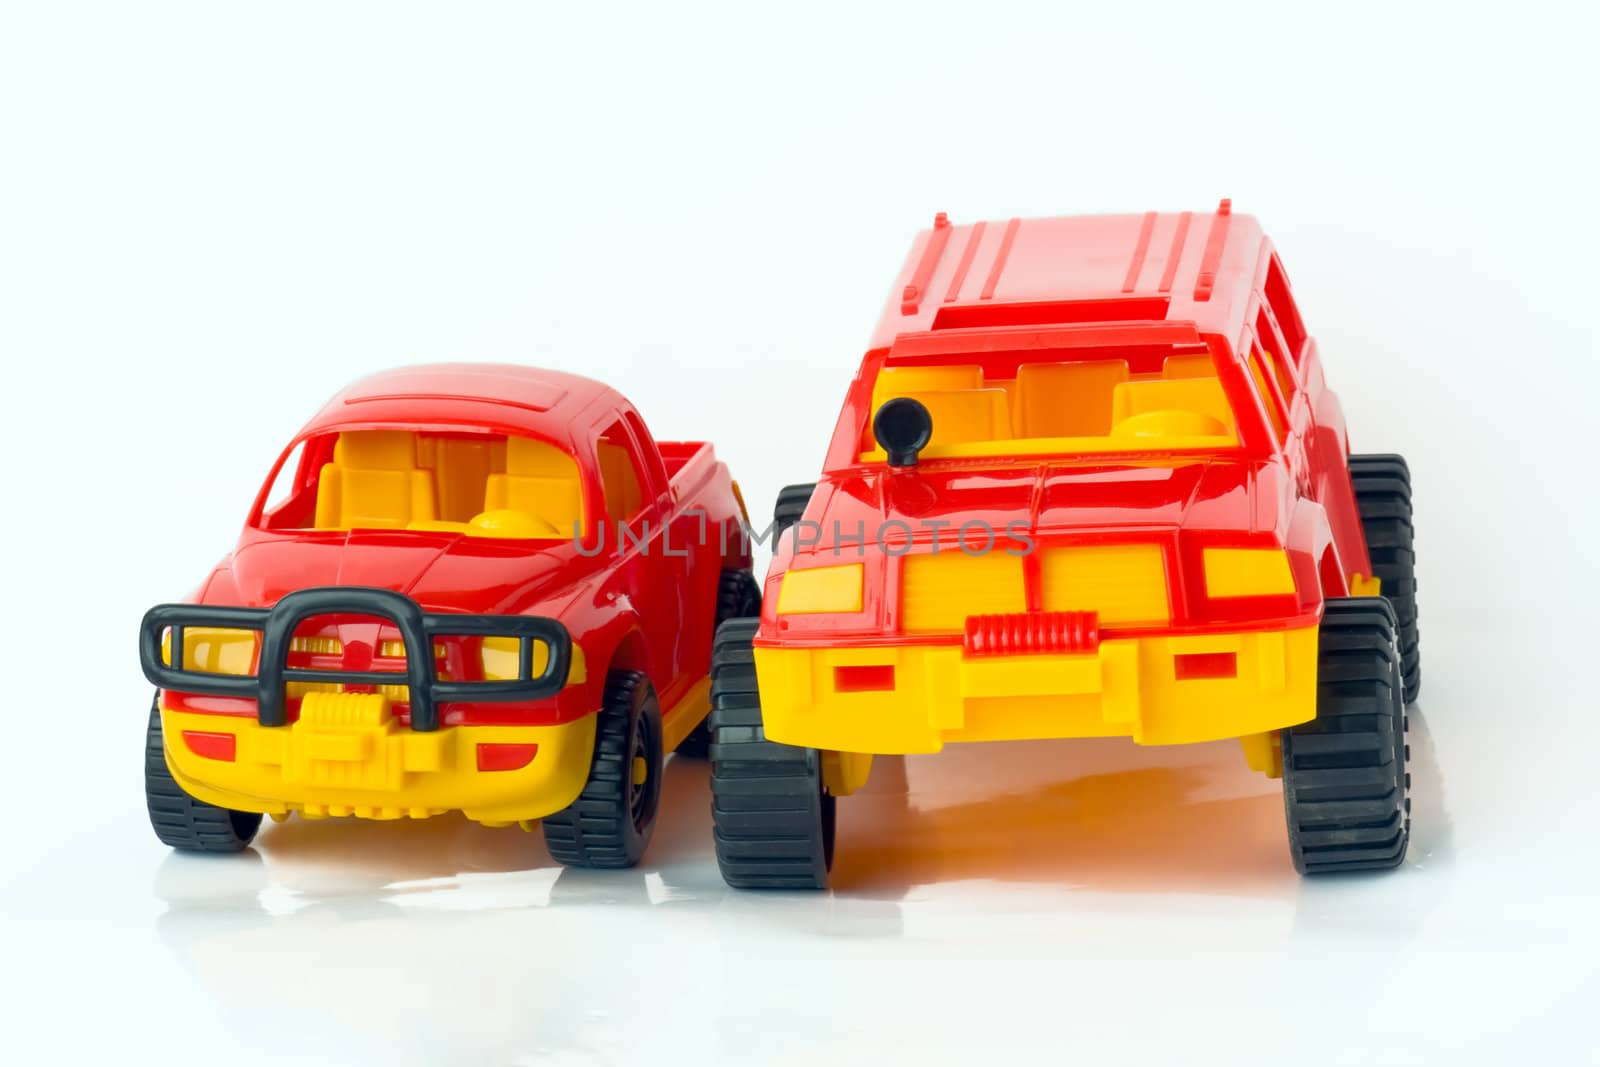 Two toy cars, isolated on a white background.